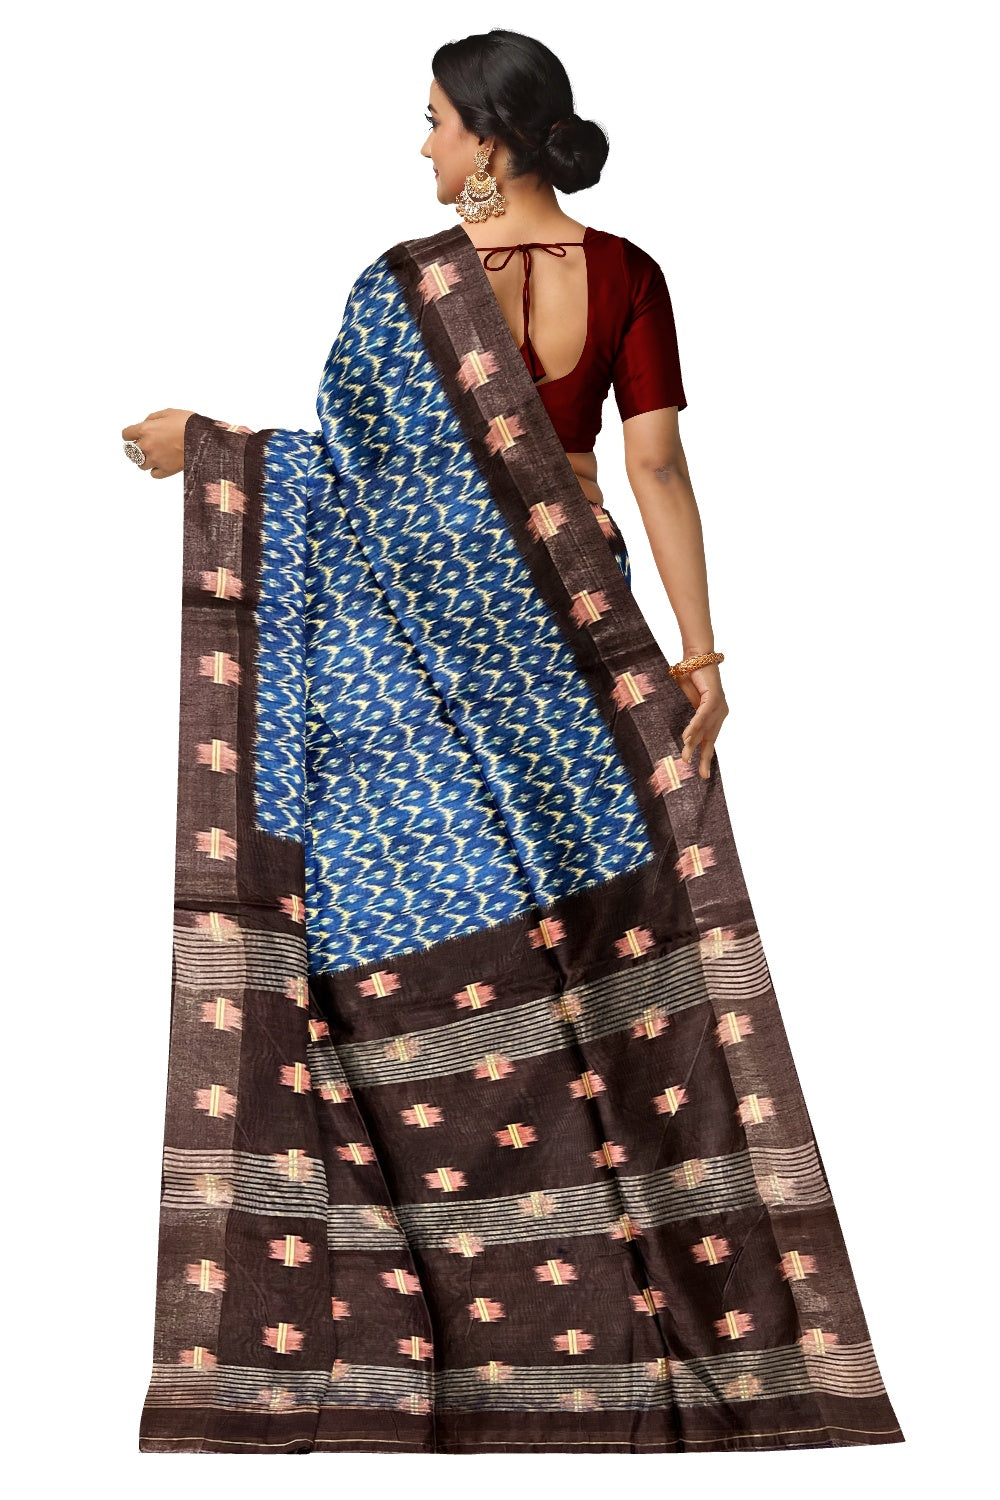 Southloom Tussar Silk Pochampally Themed Blue and White Printed Saree